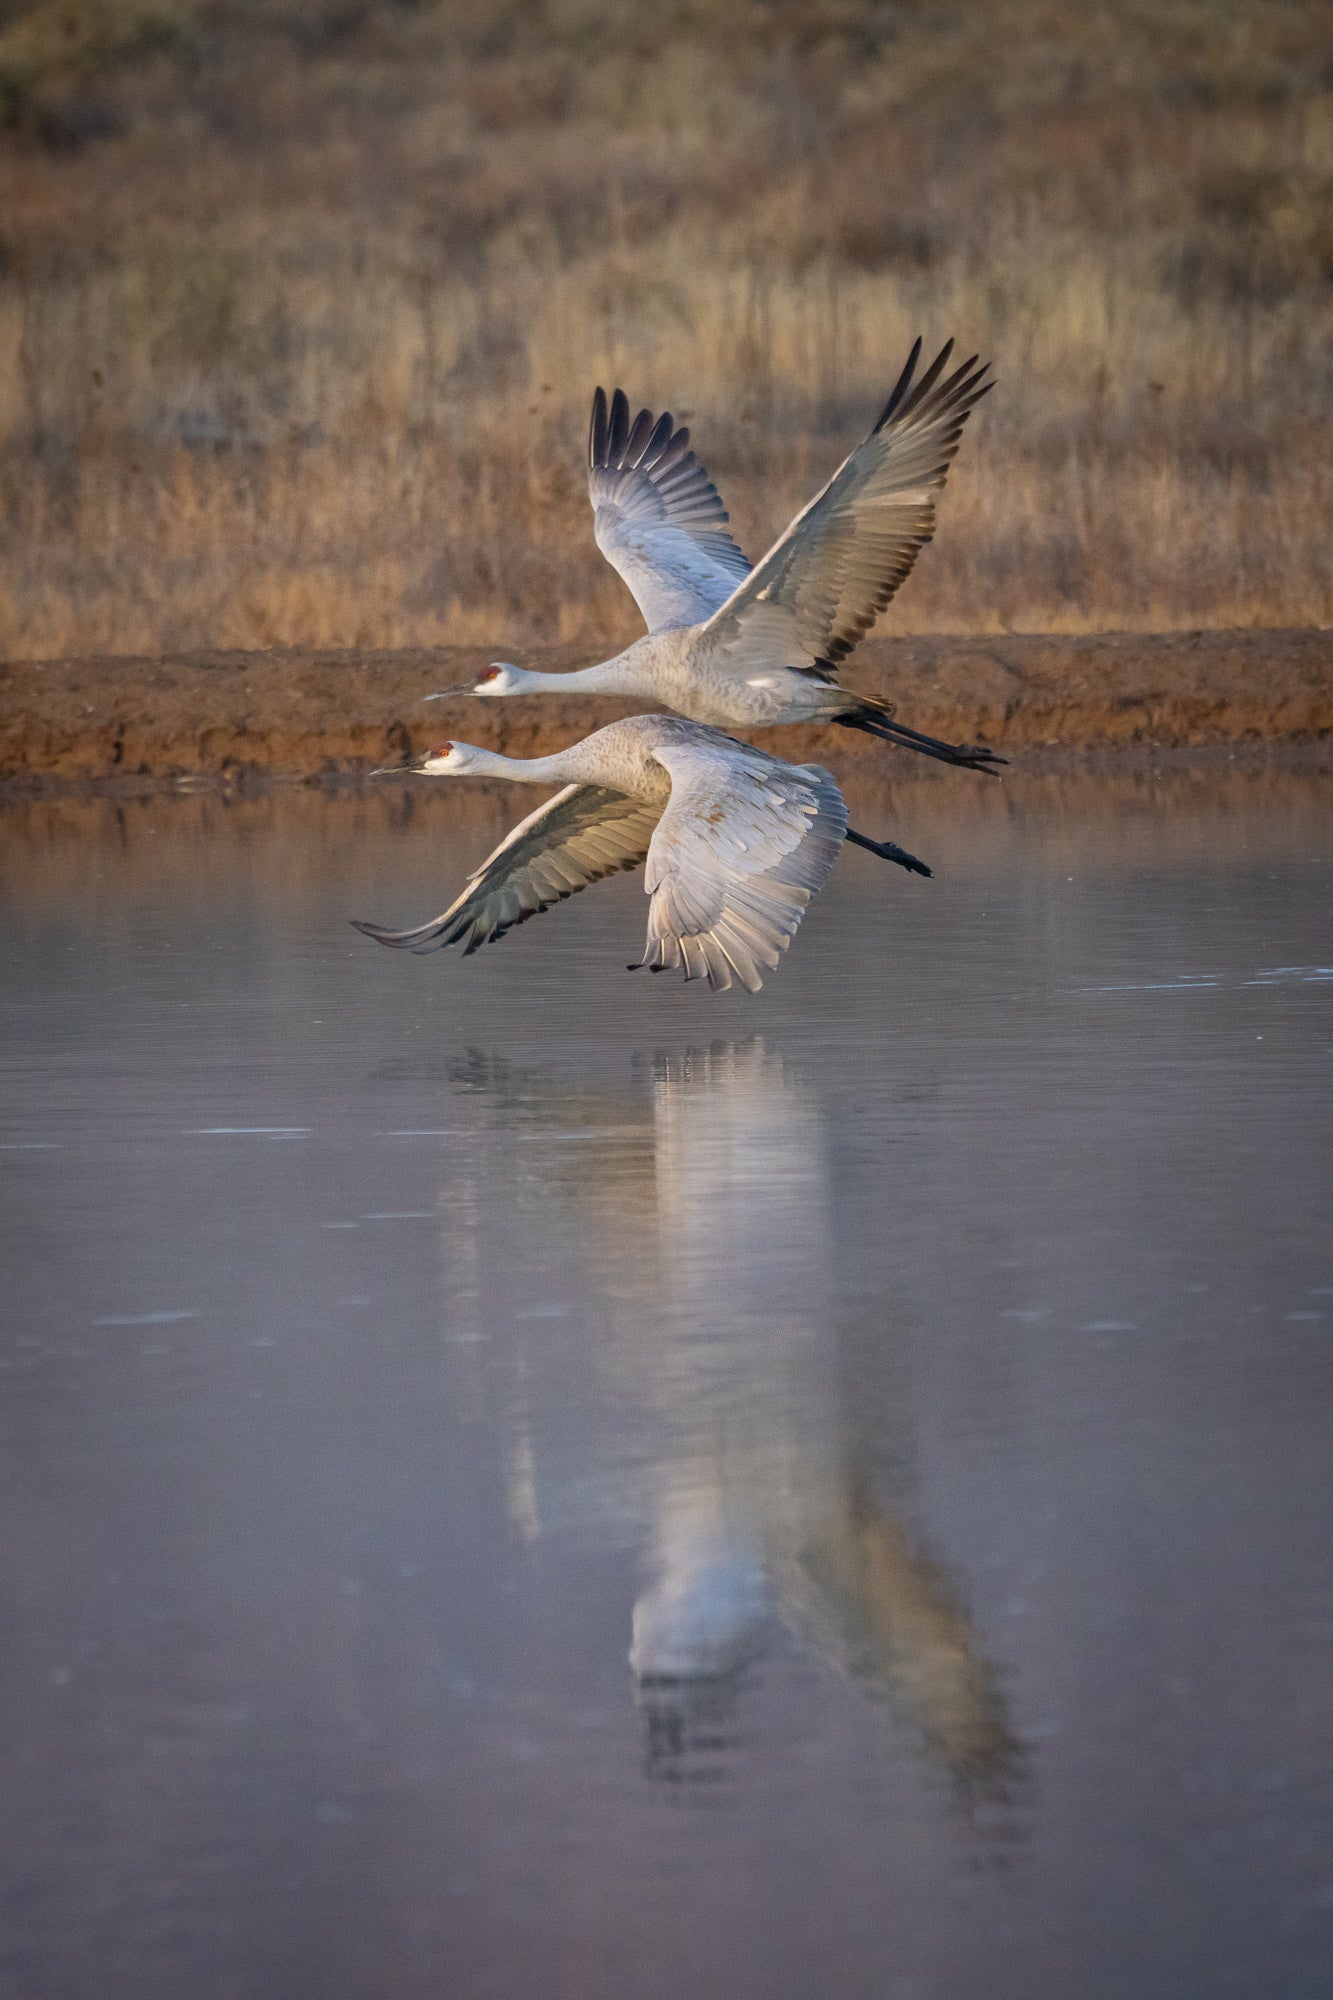 Two flying Sandhill Cranes in New Mexico with reflections on the Water